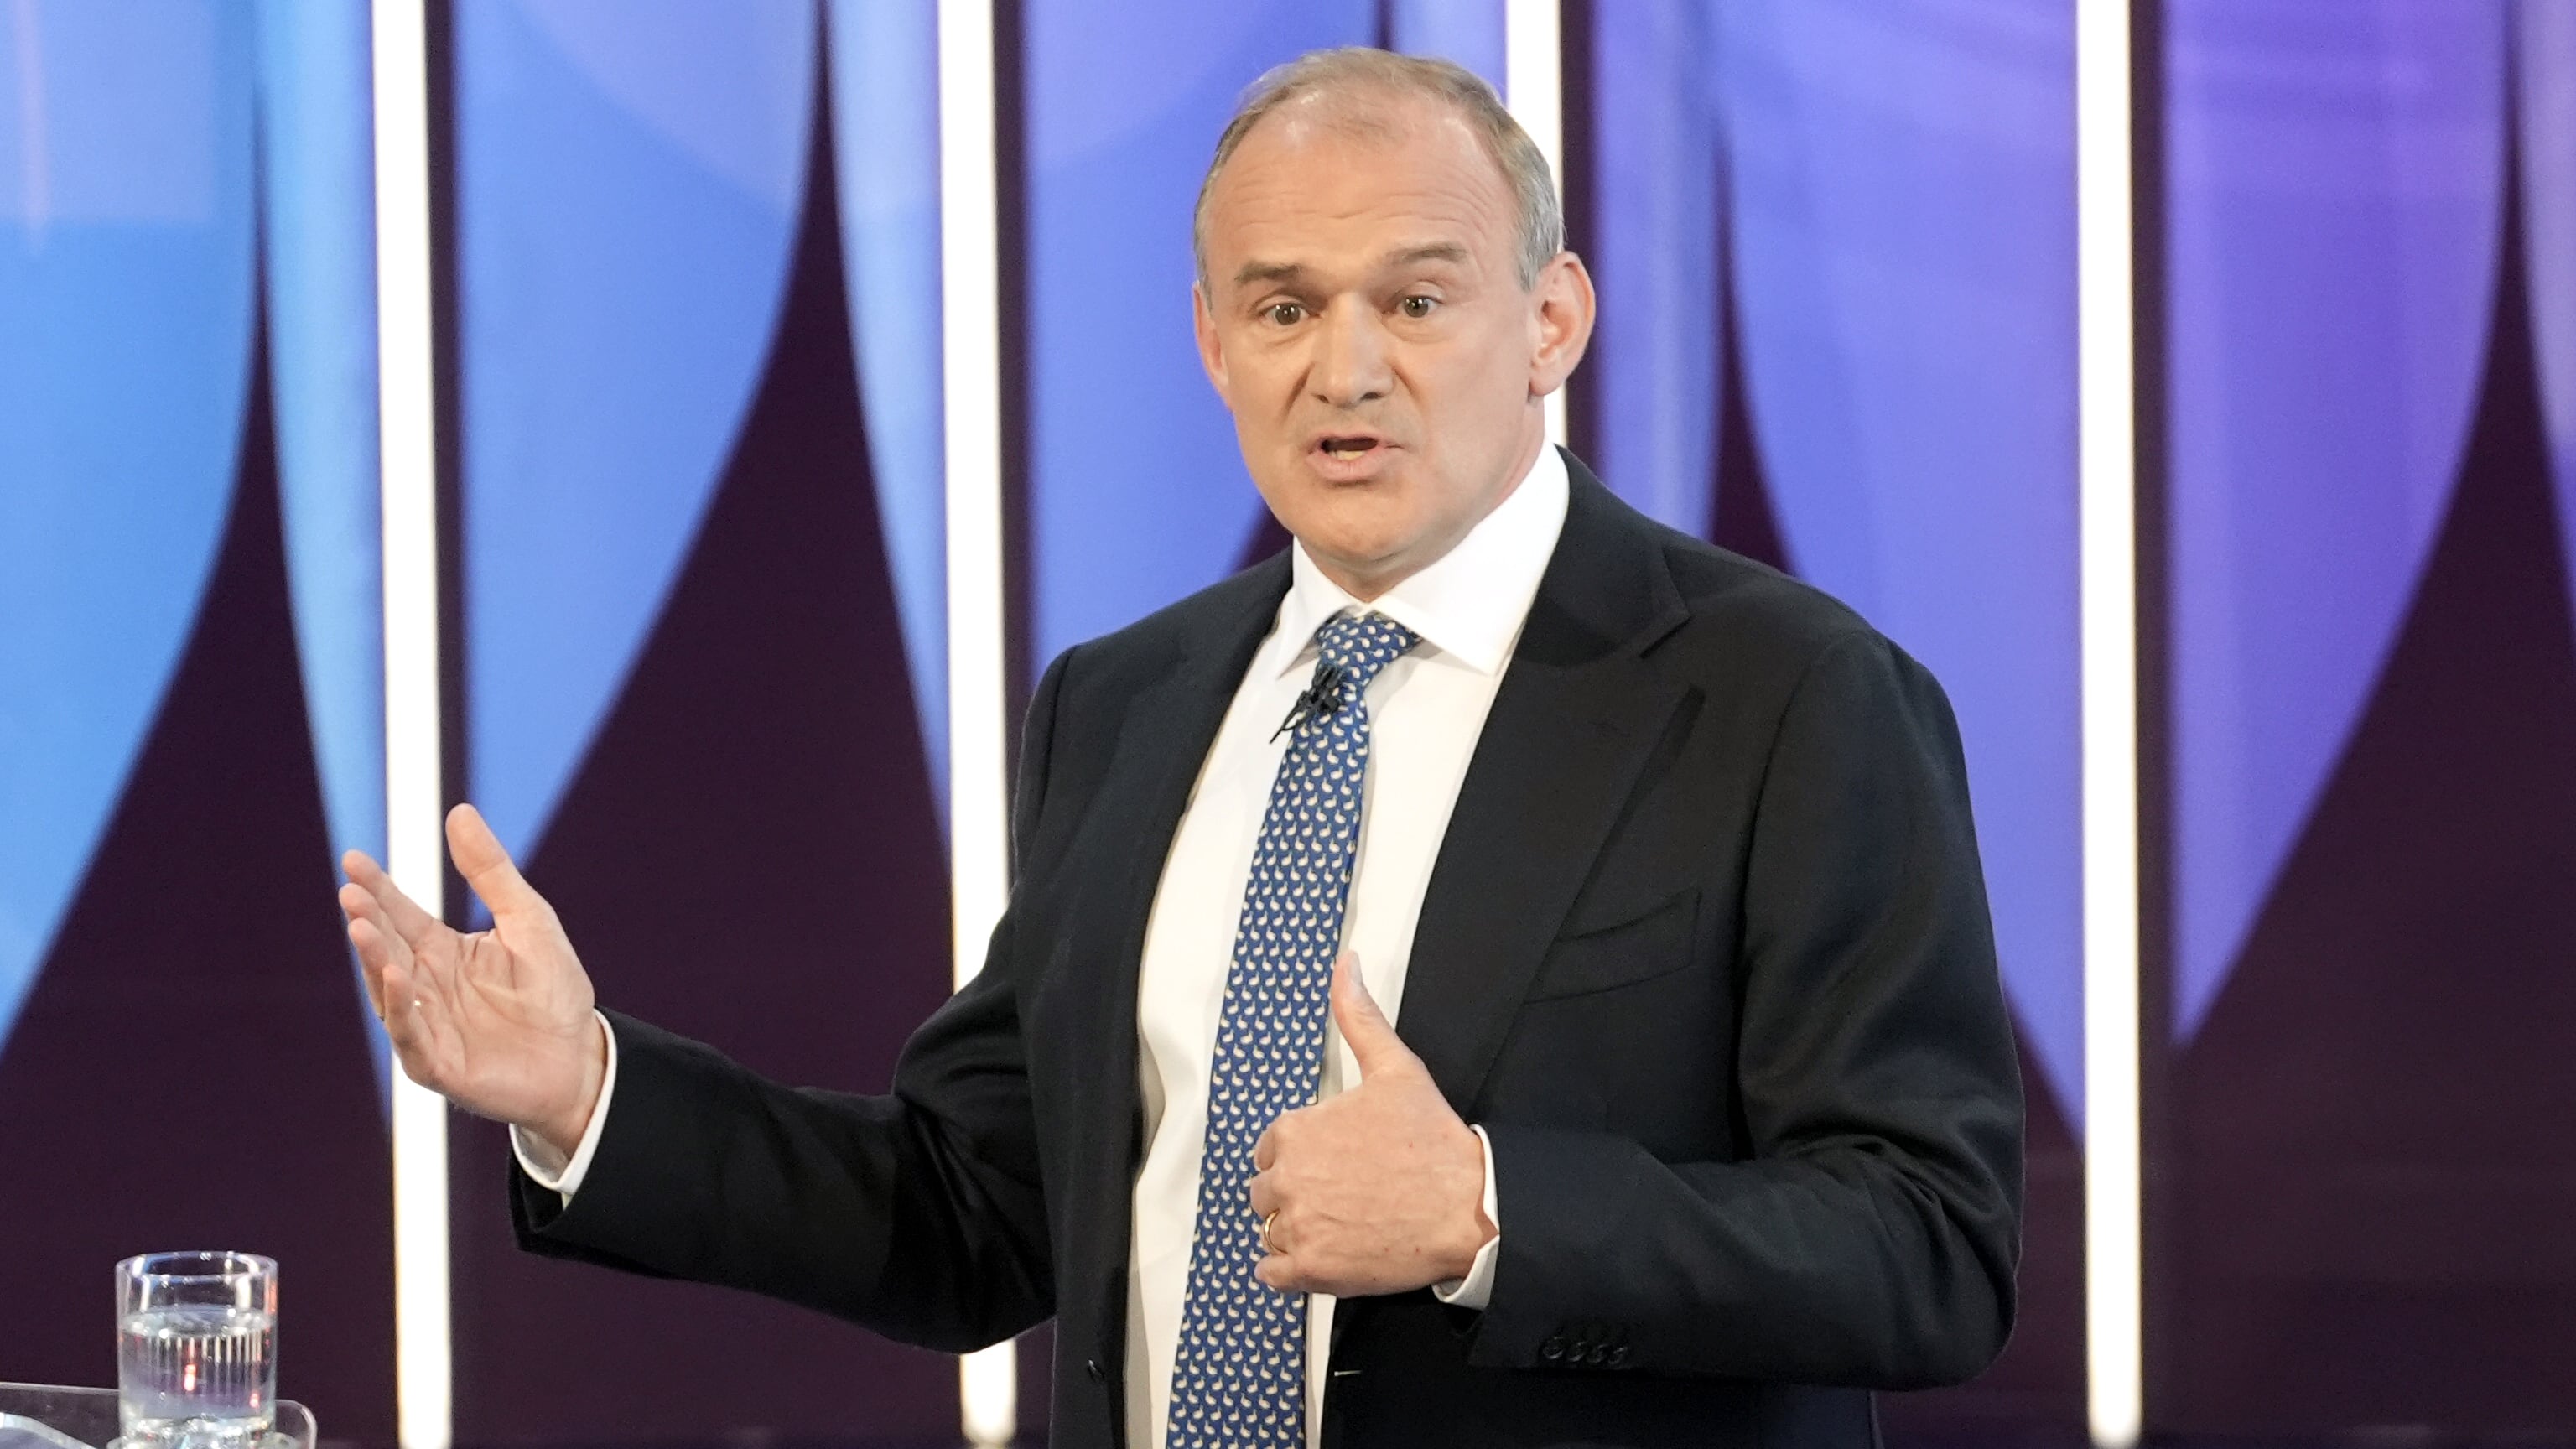 Liberal Democrats leader Sir Ed Davey speaking during a BBC Question Time Leaders’ Special in York